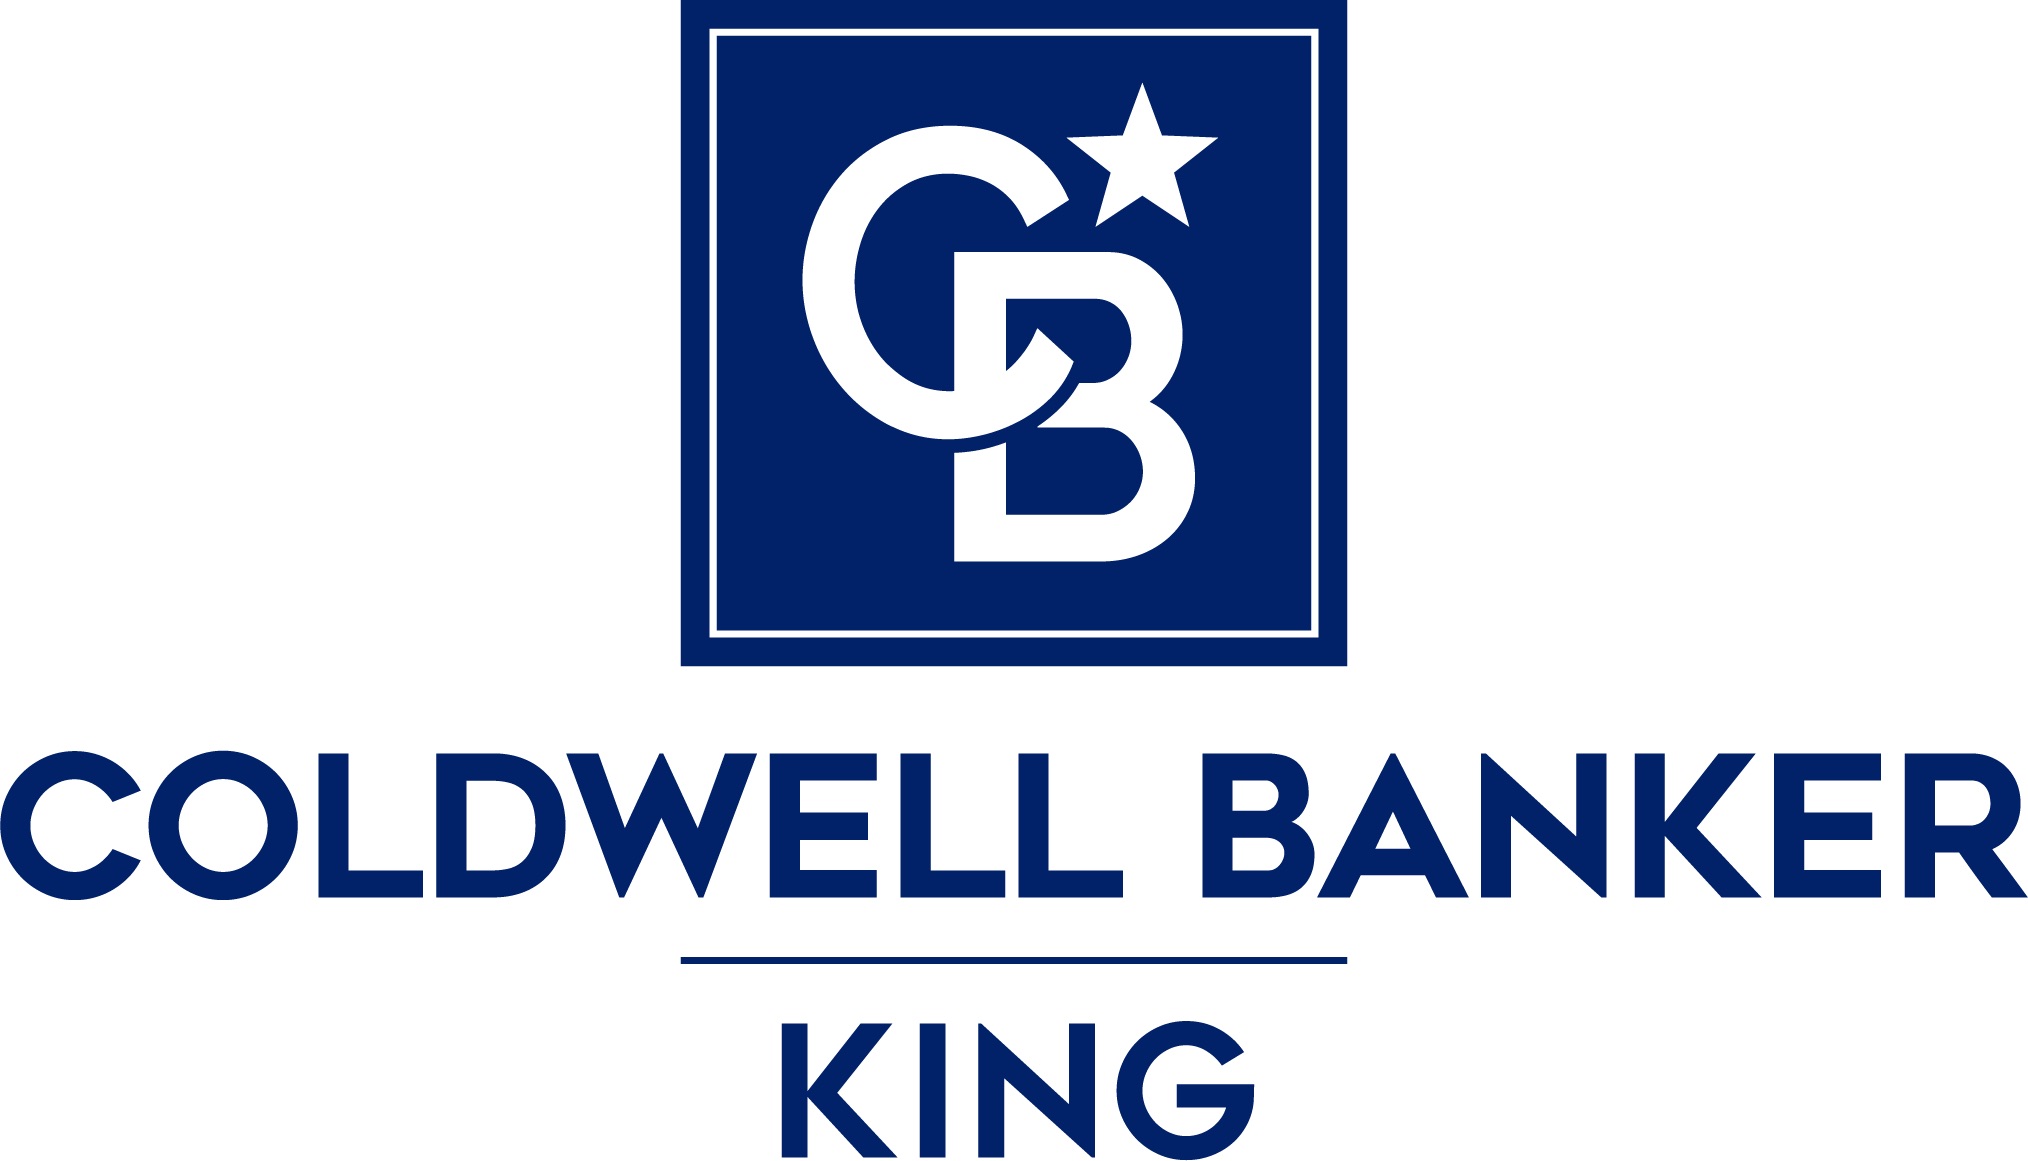 Coldwell Banker King